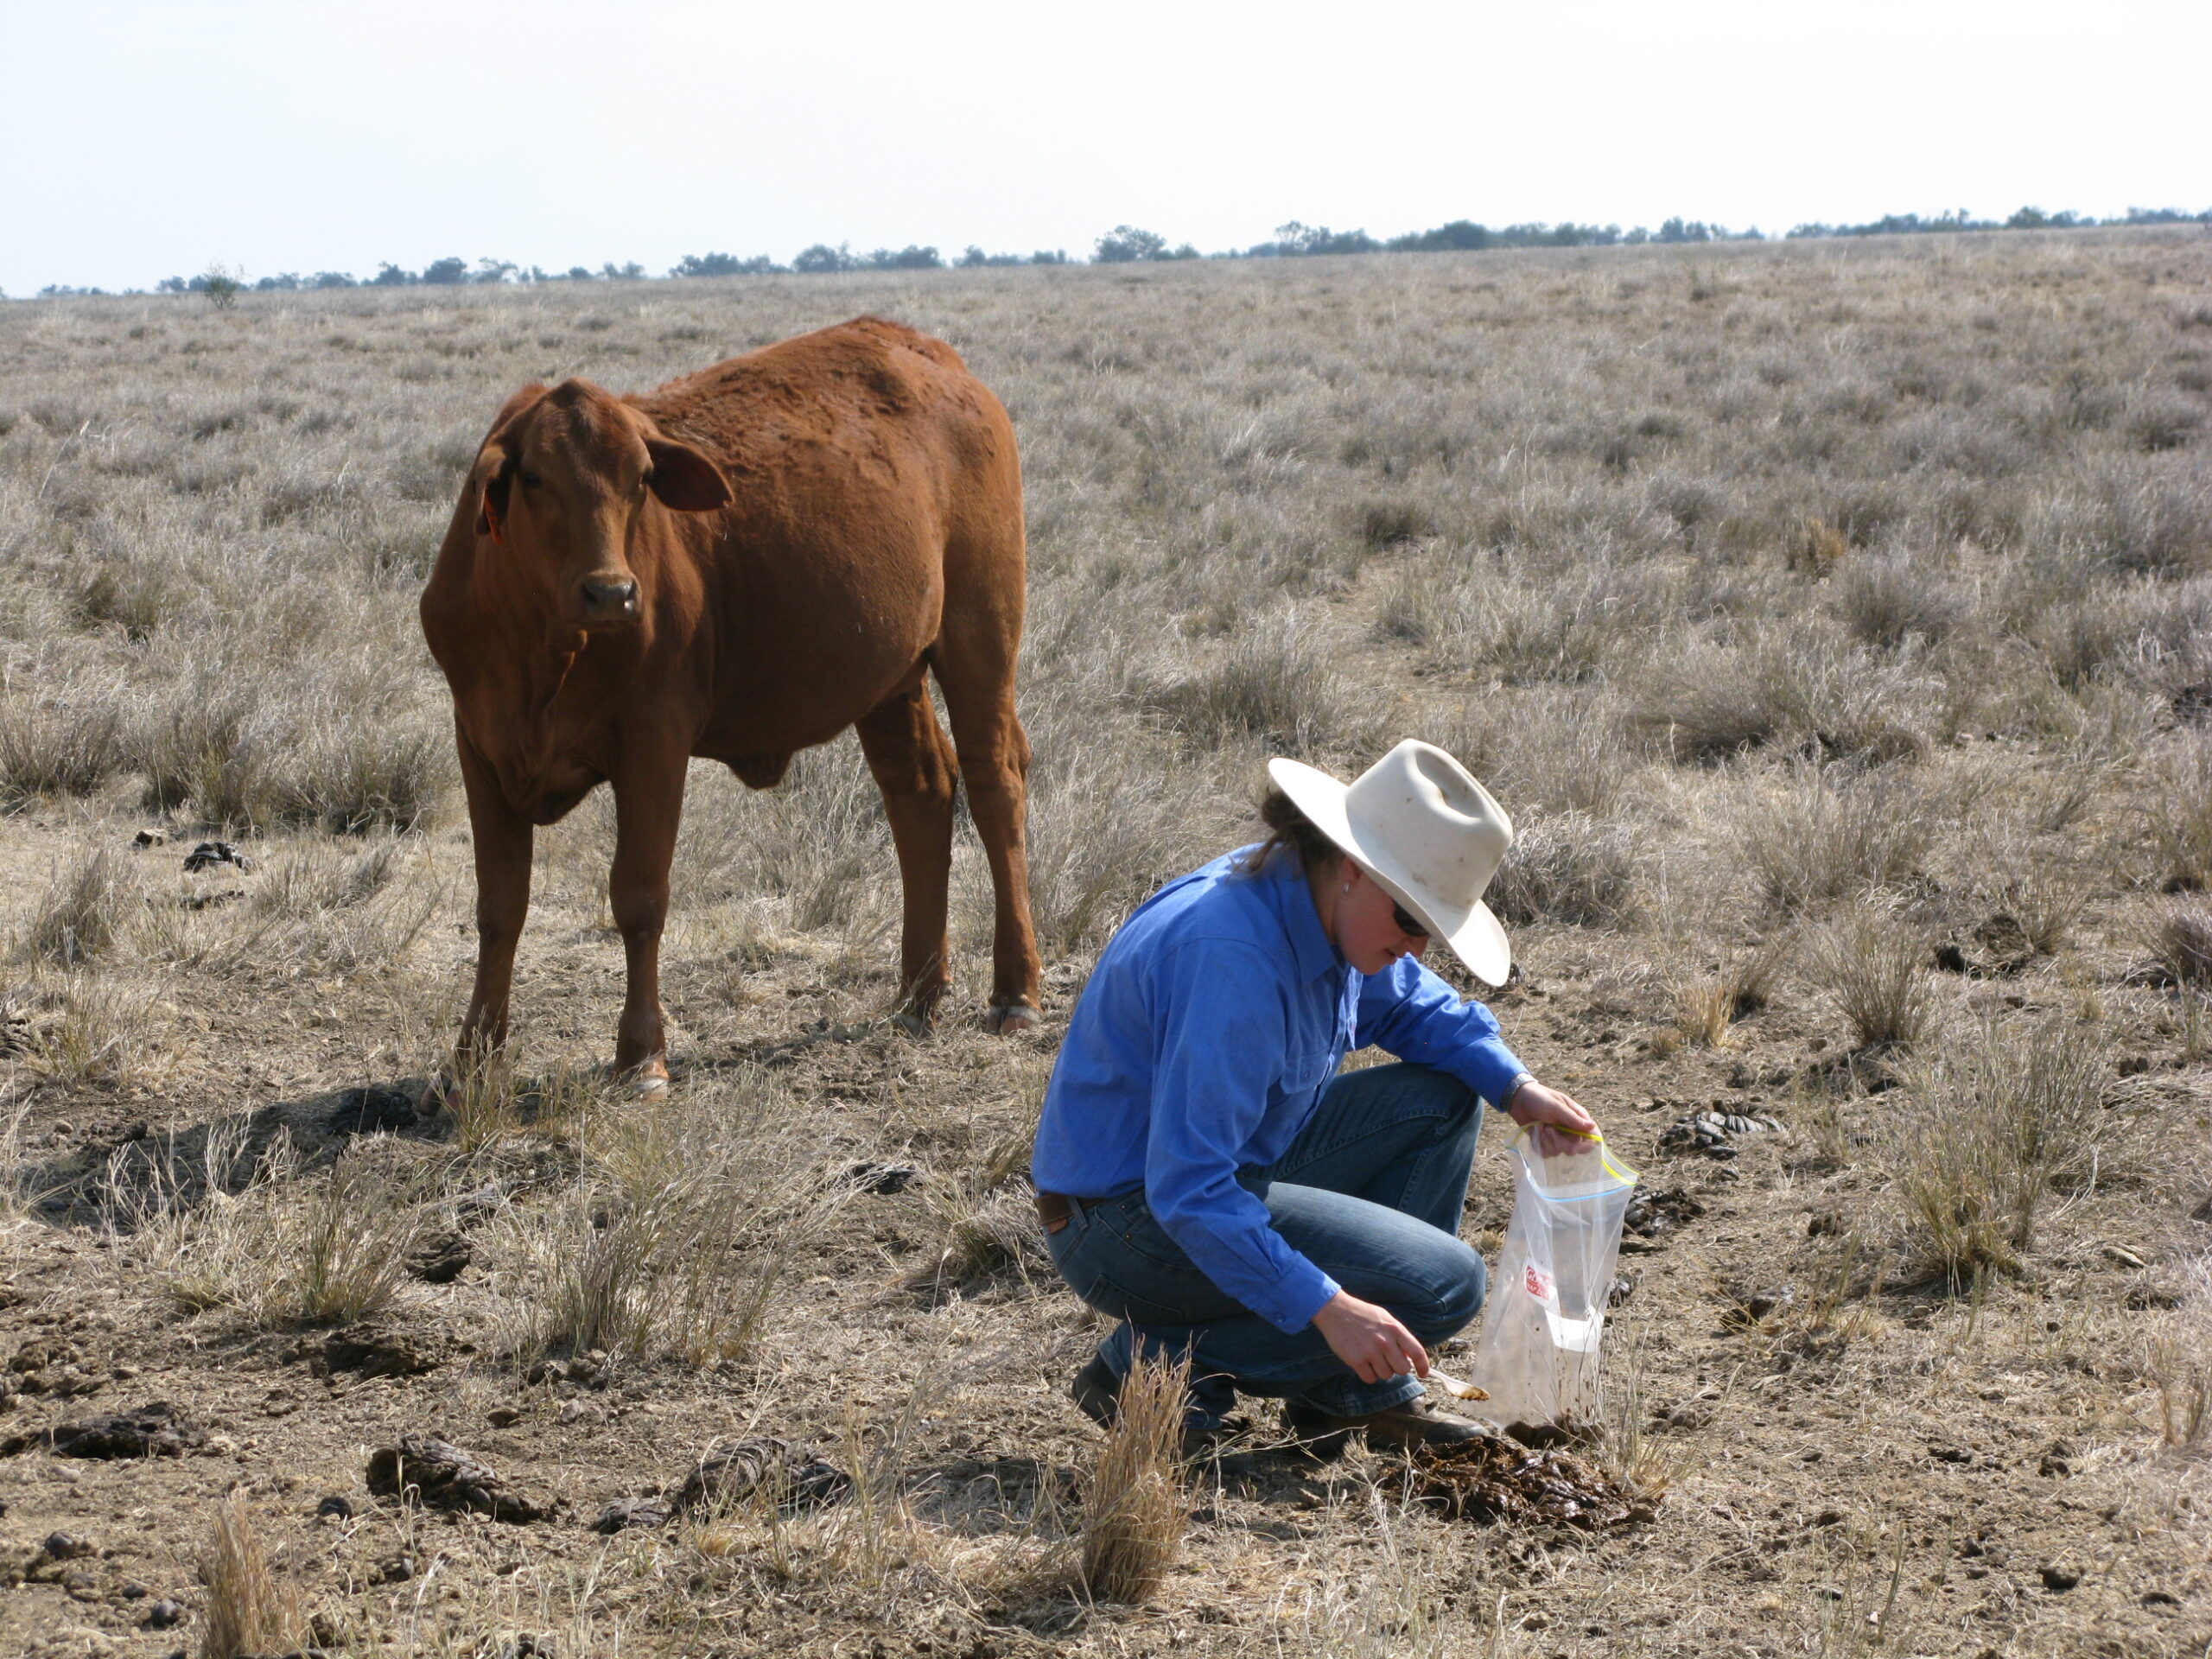 Person collecting samples of dung in the paddock with a heifer in the background.